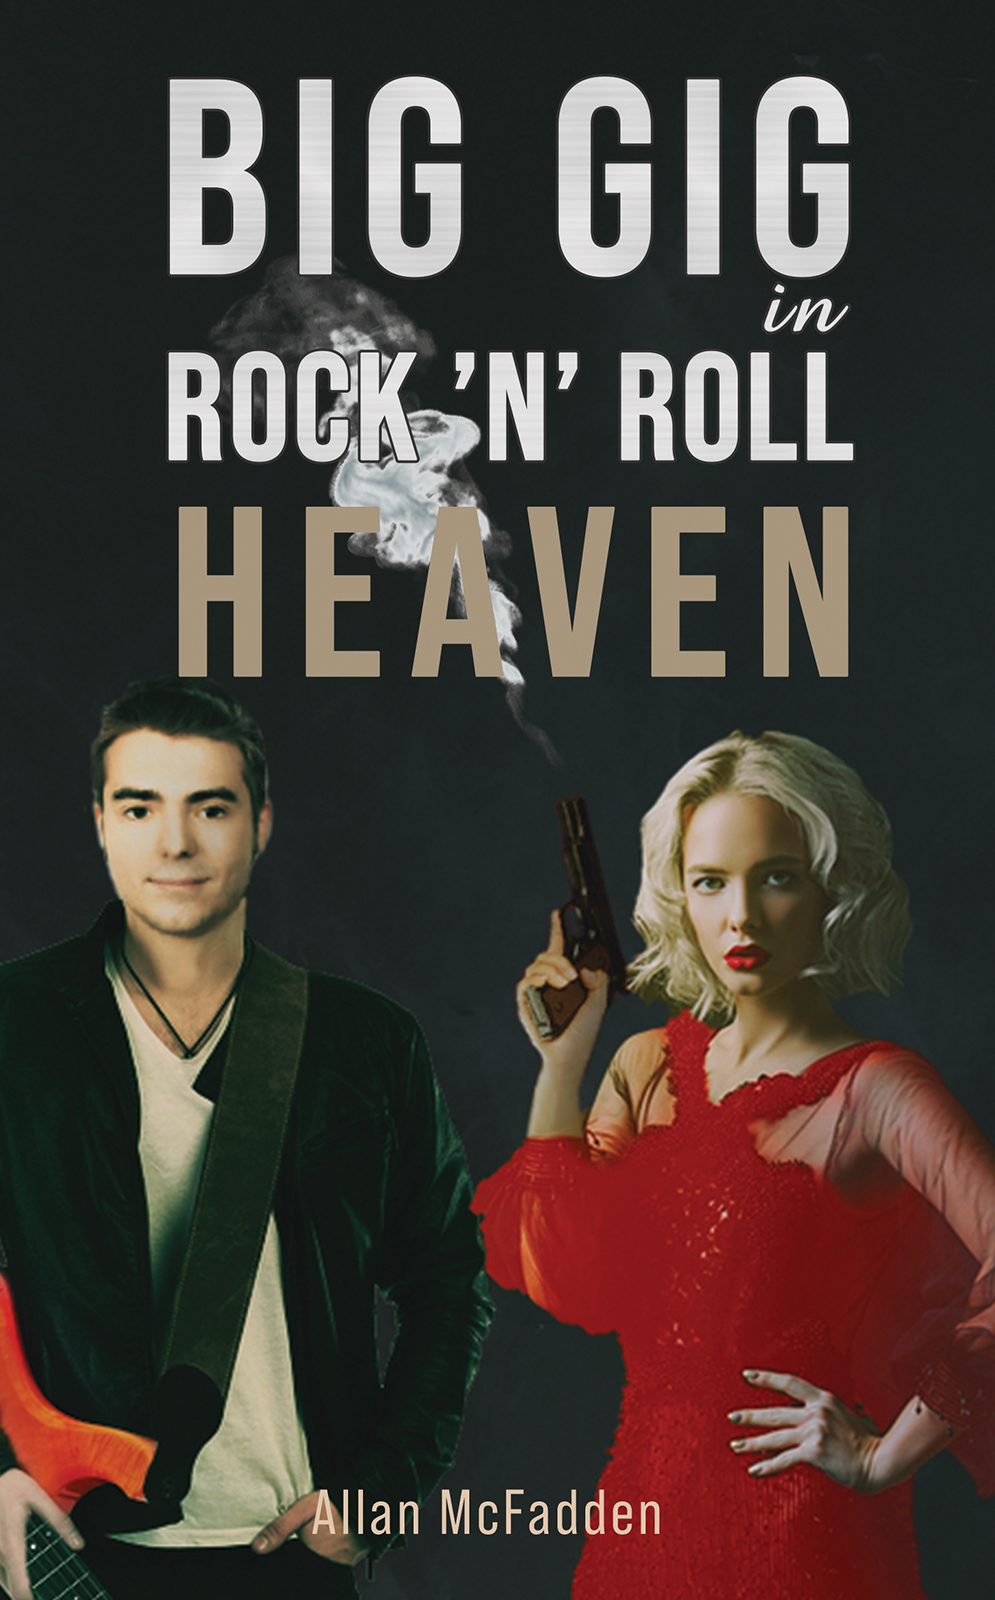 This image is the cover for the book Big Gig in Rock ’N’ Roll Heaven